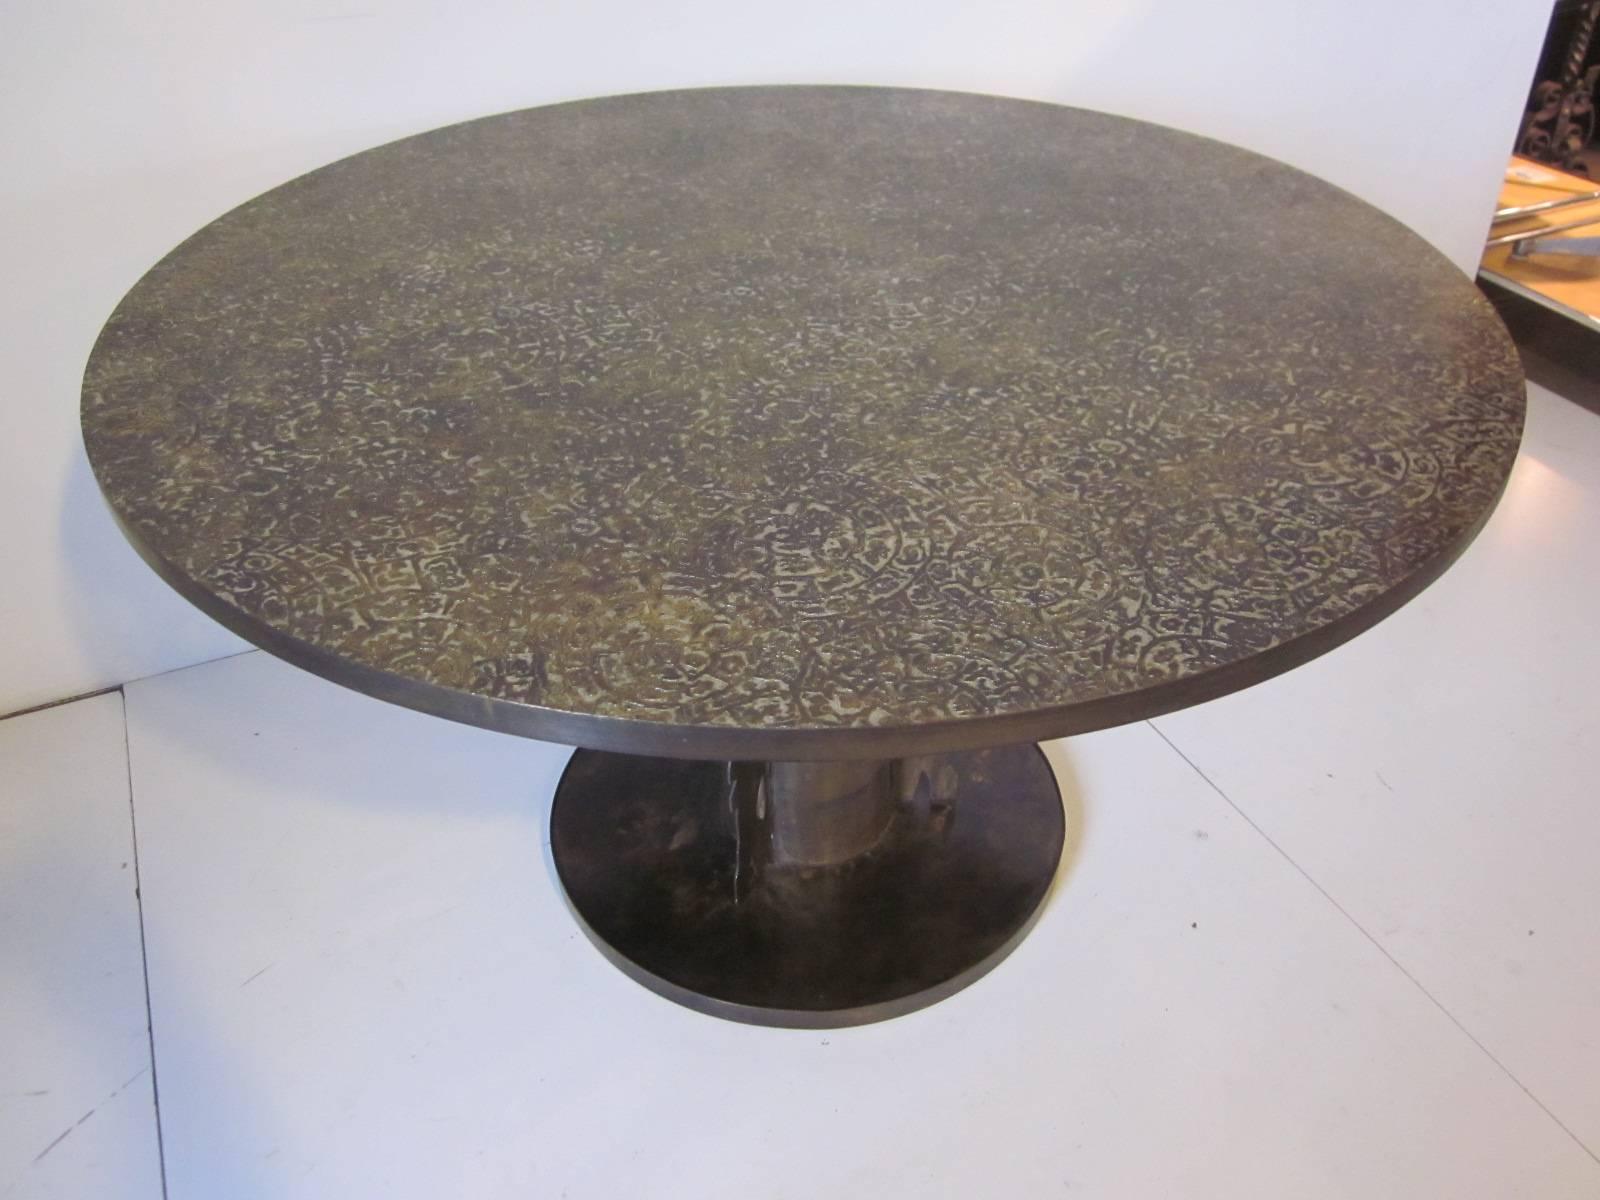 A beautiful handcrafted dining or game table with acid etched relief designs to the top in bronze with a pewter wash bringing out the details. Sitting on a organic styled column support and round base with the engraved signature of the artist /